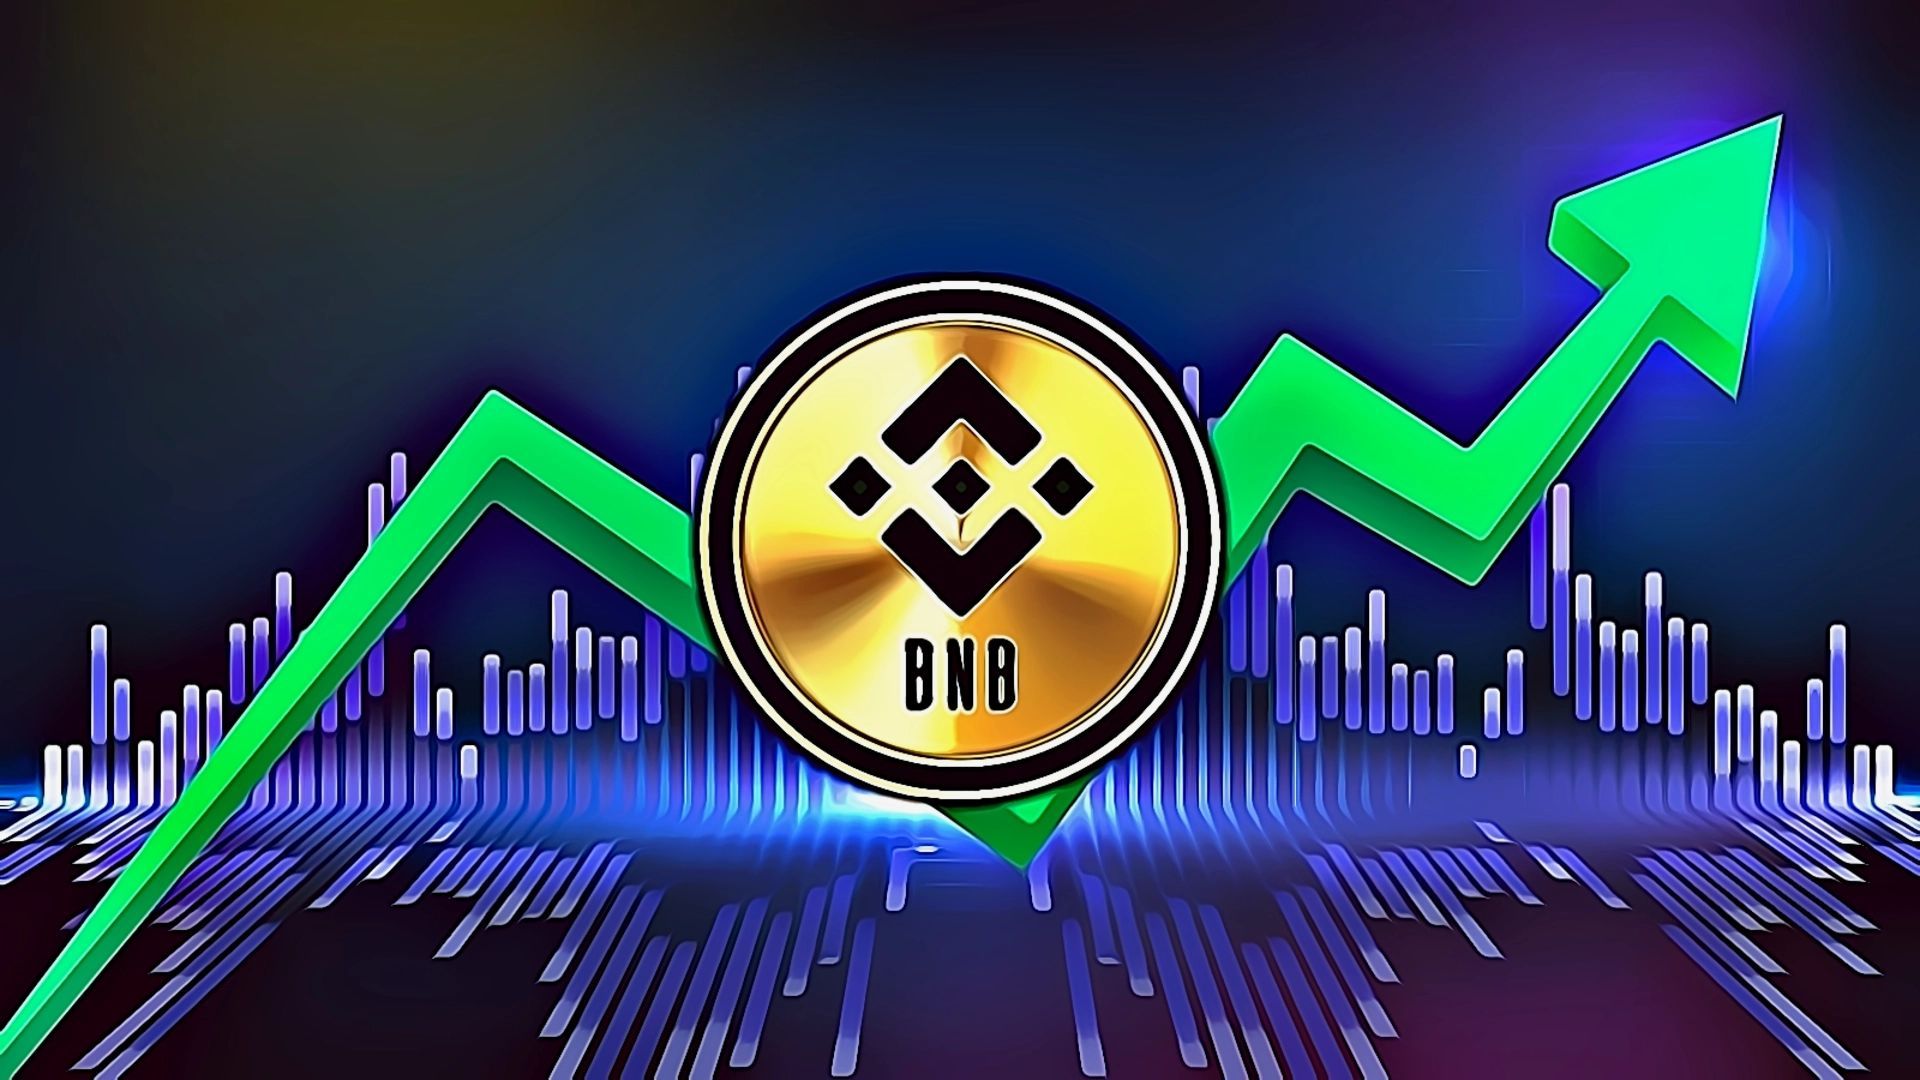 BINANCE COIN PRICE ANALYSIS & PREDICTION (January 31) – BNB Faces Important Resistance Line After Forming A Double-Bottom, Potential Breakout Ahead